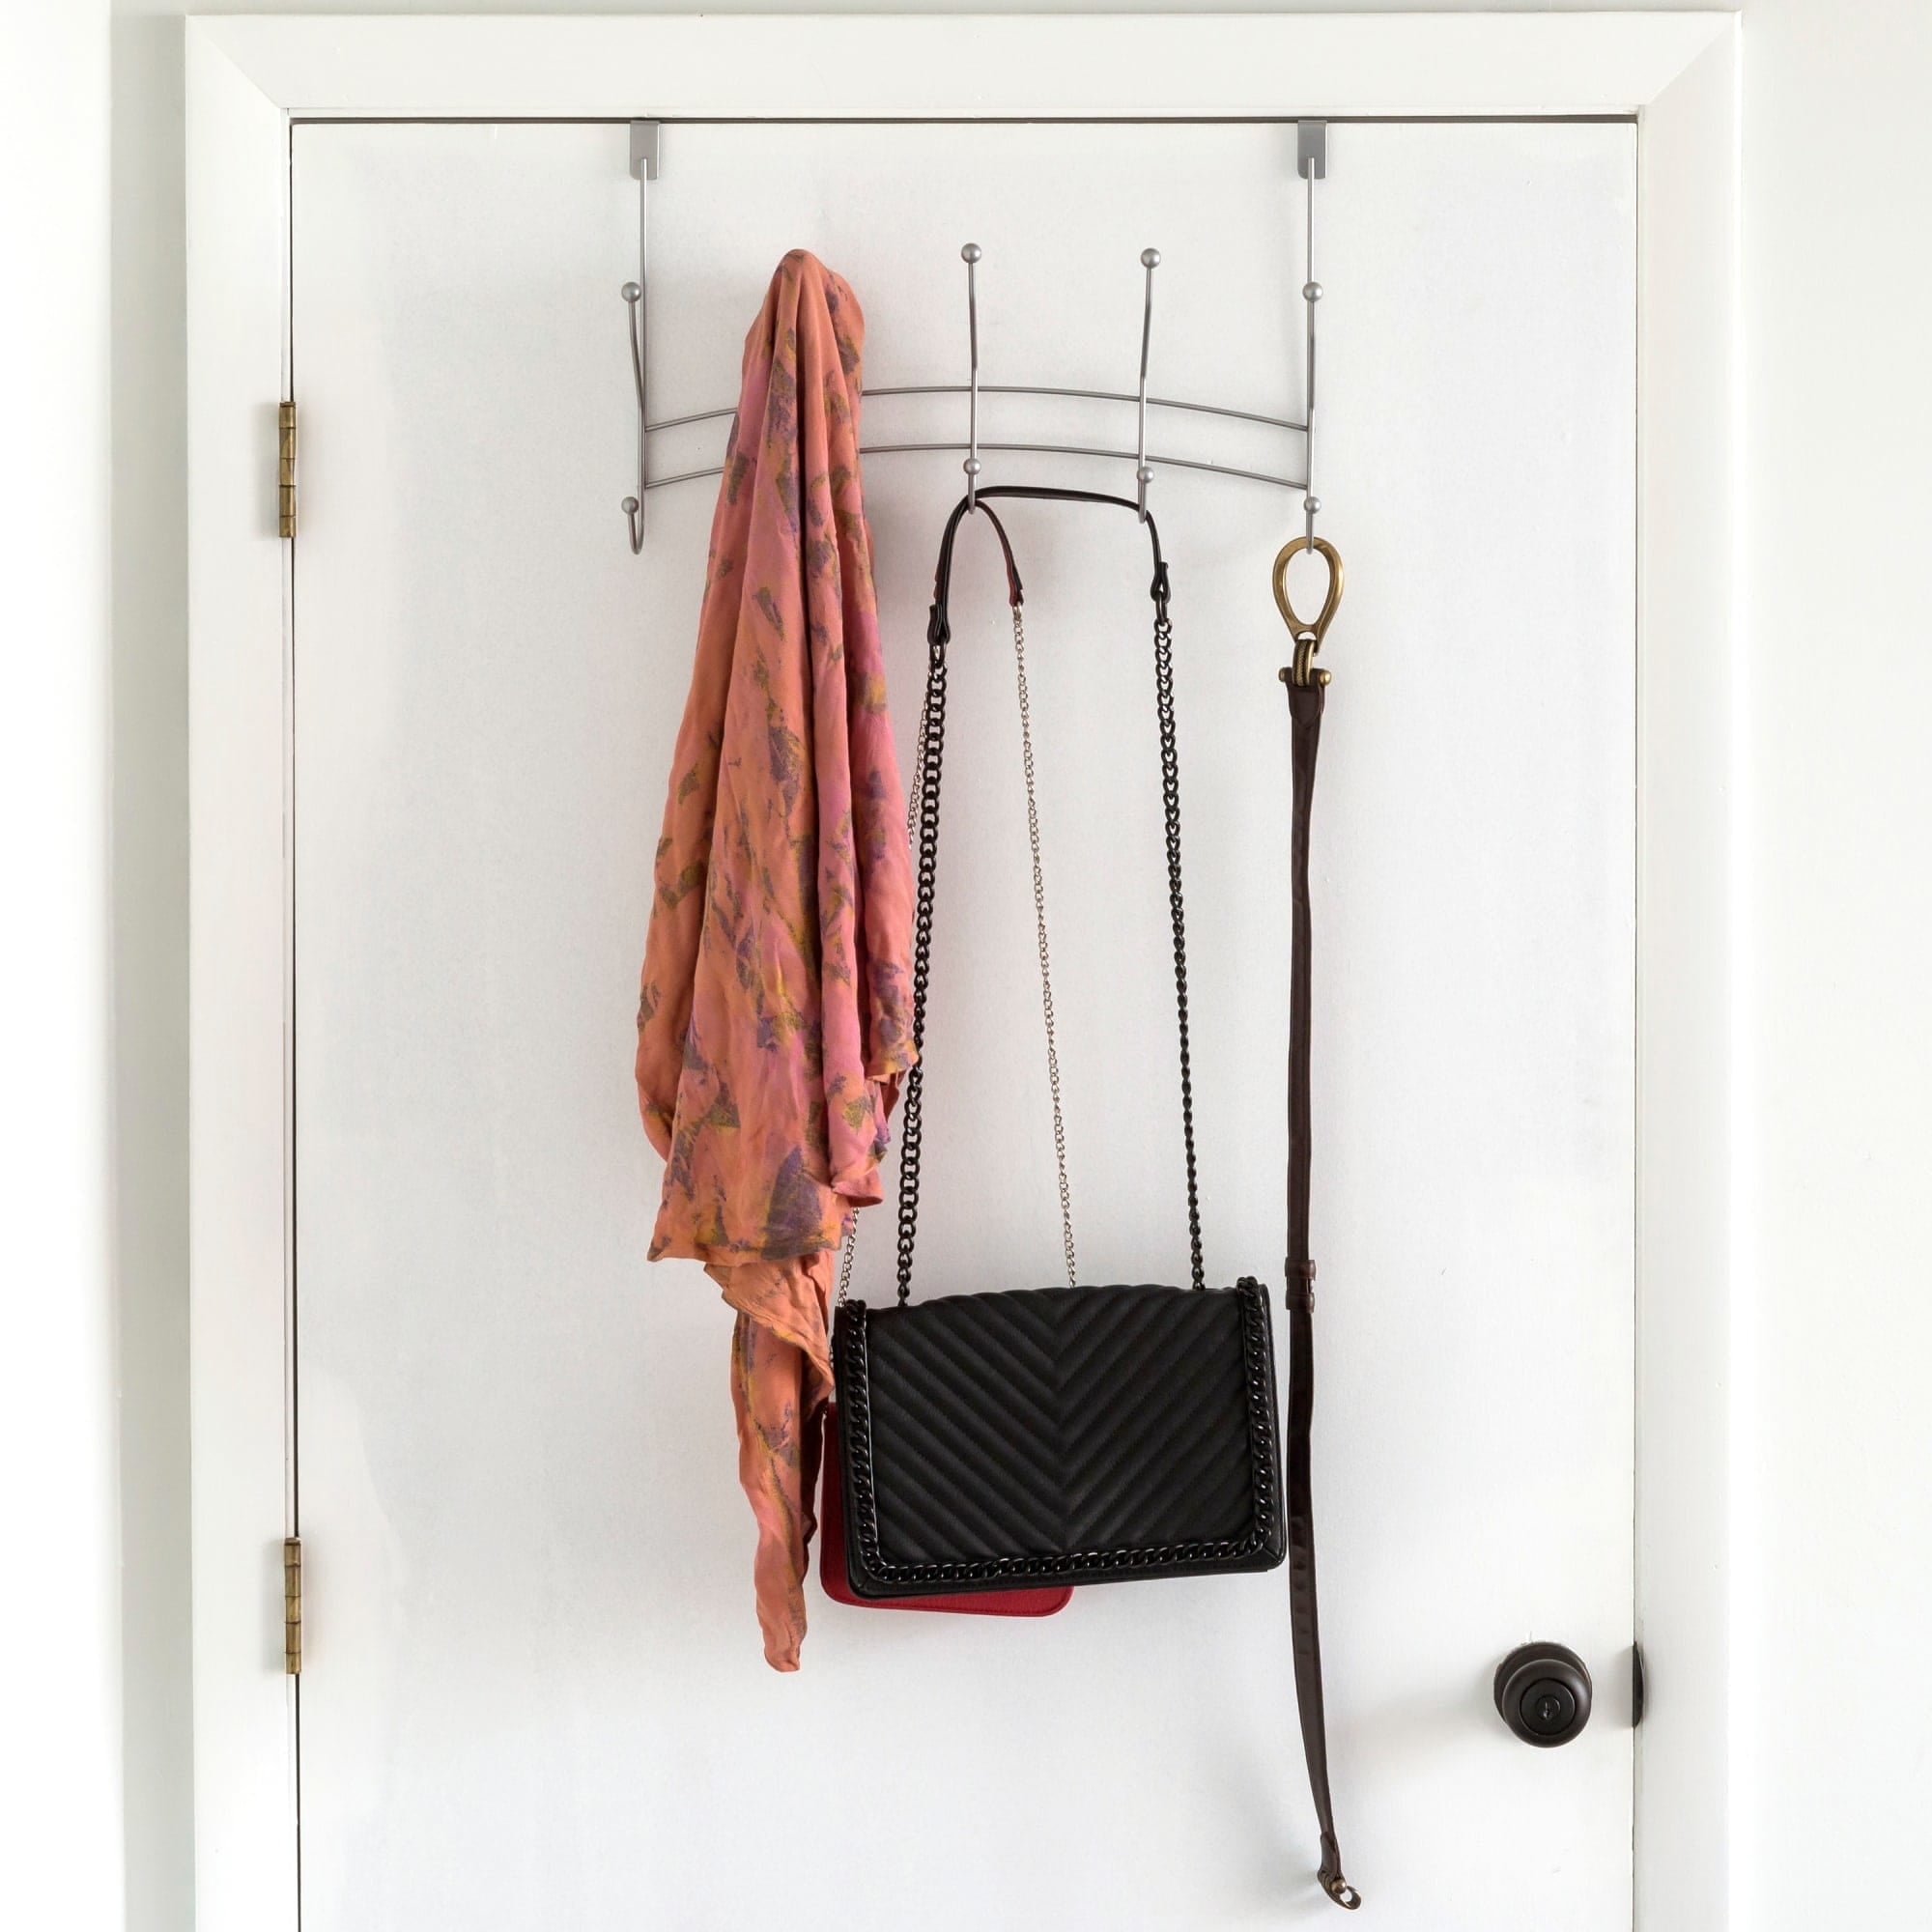 Home Basics 5 Dual Hook Over the Door Hanging Rack, Silver $5.00 EACH, CASE PACK OF 12